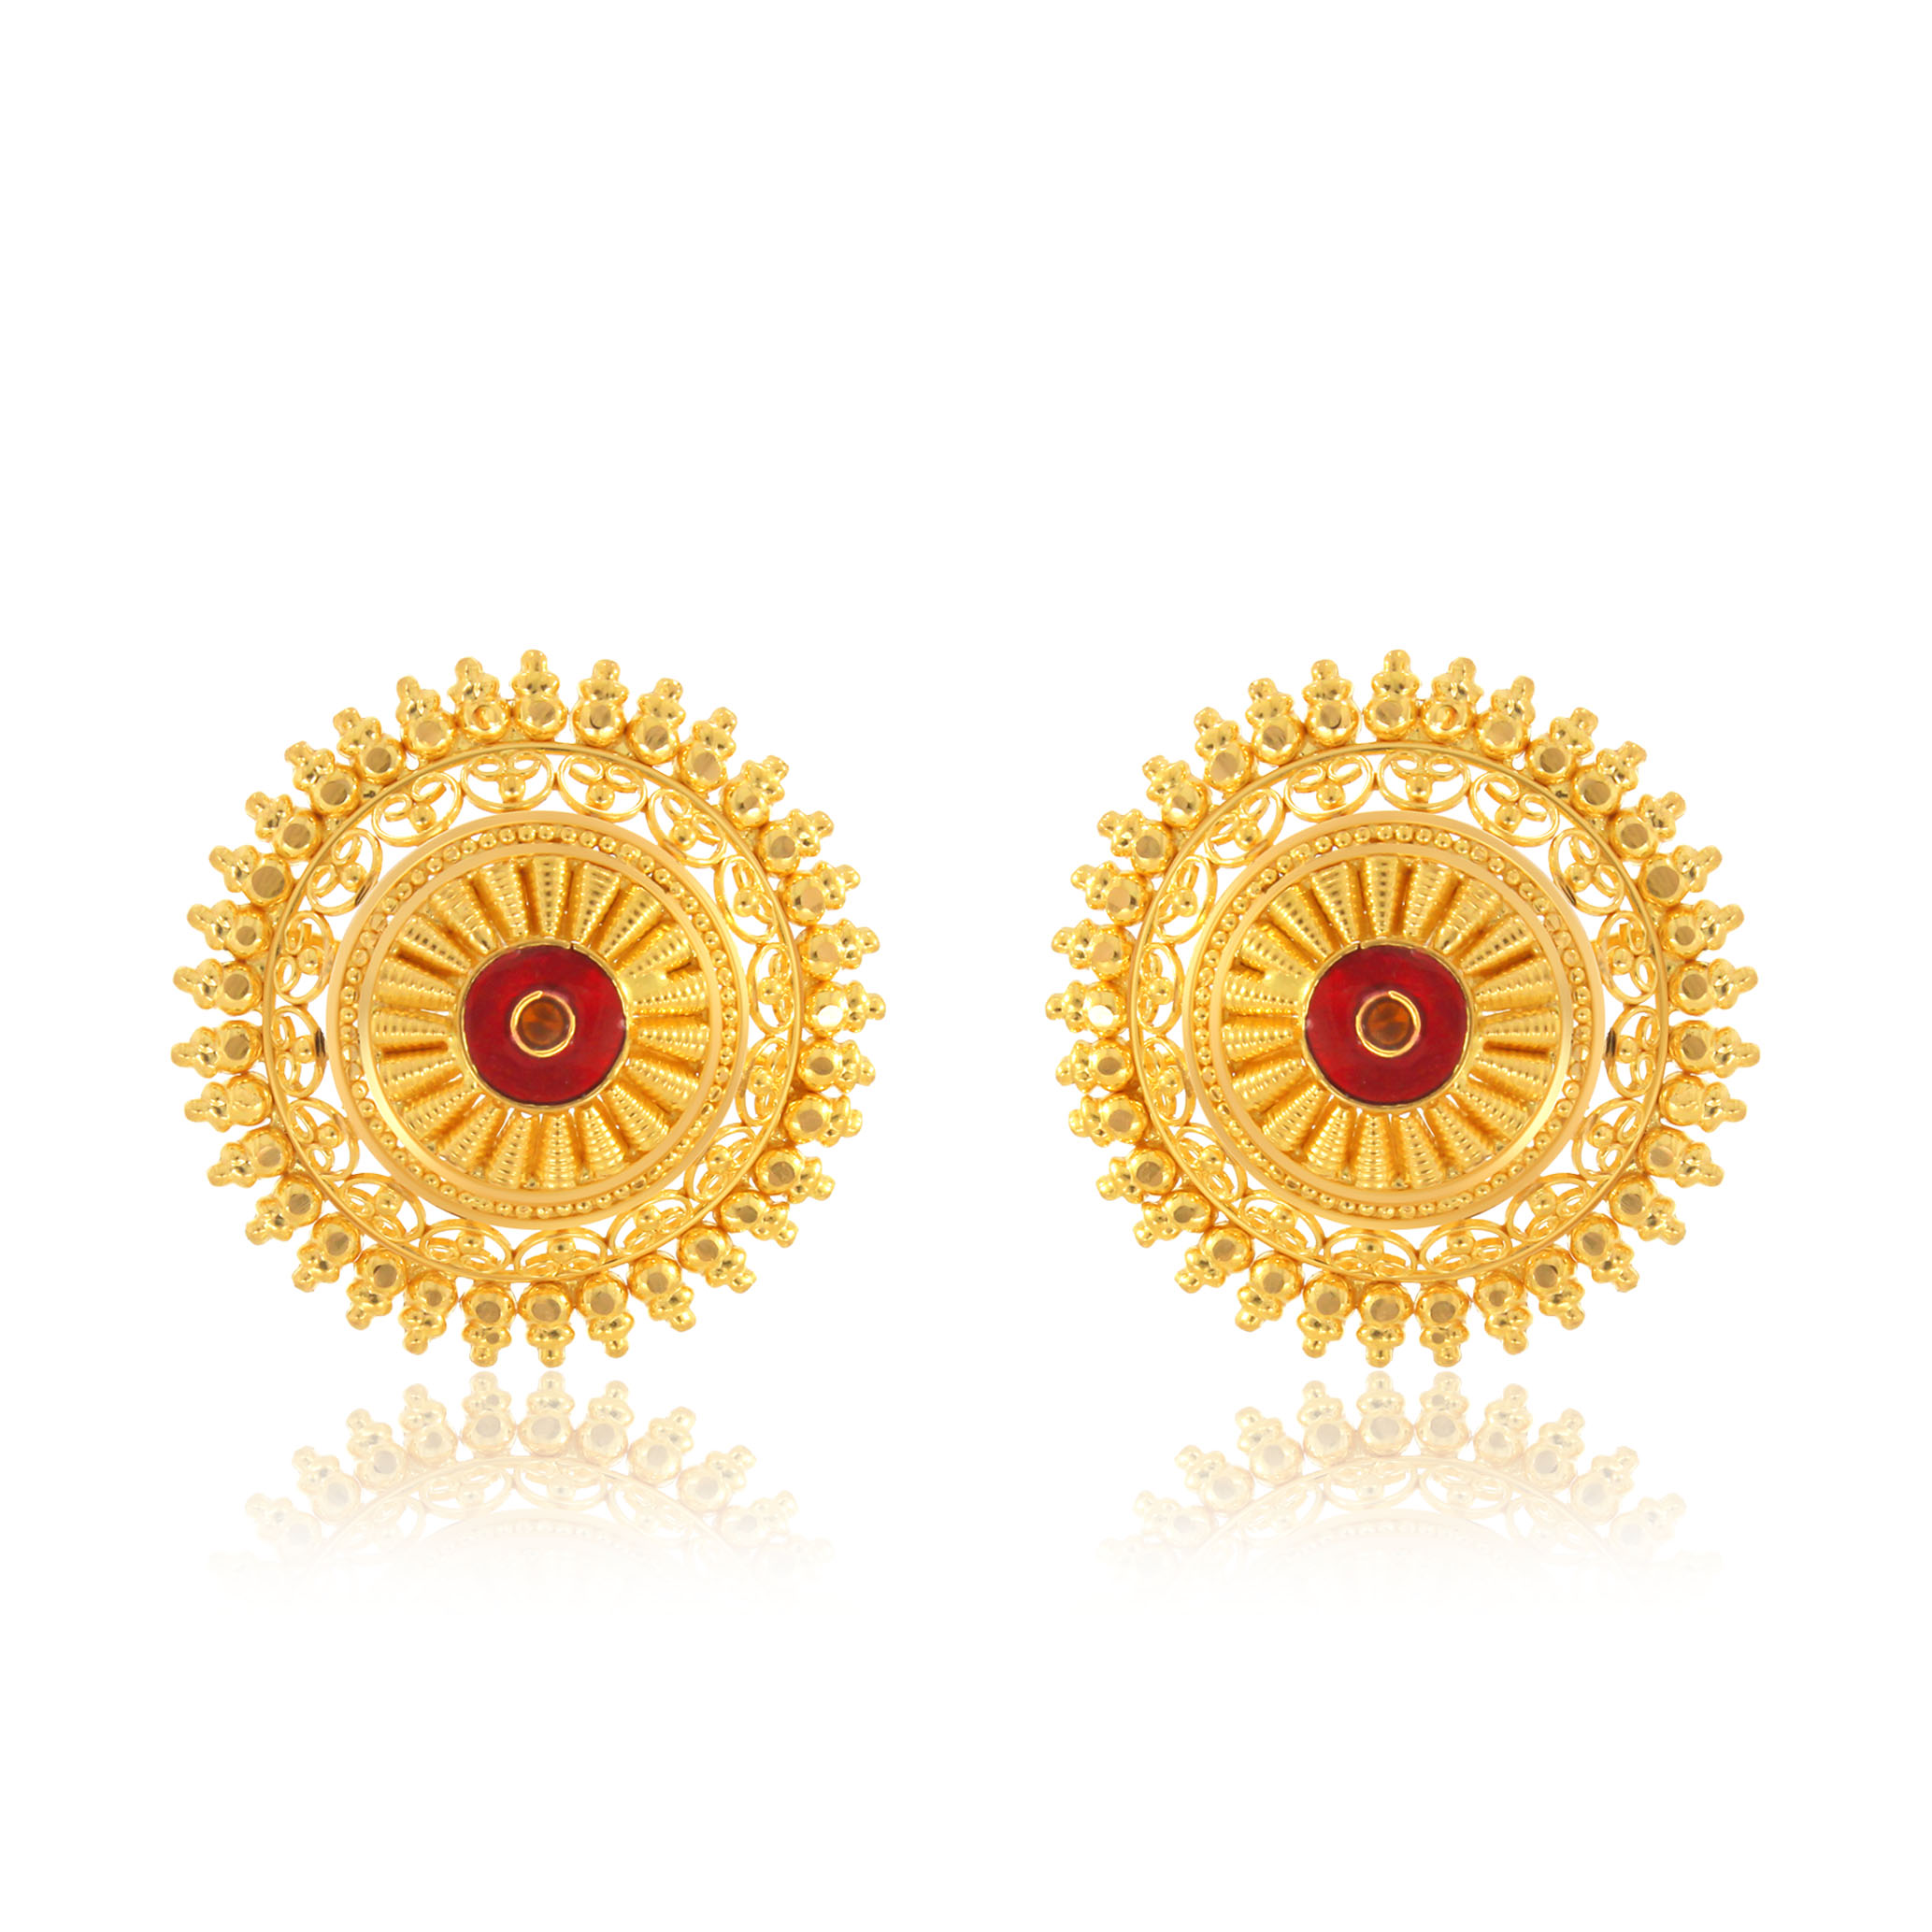 RC  AABI JEWELS 22CT  BIS HALLMARK GOLD EARRINGS FOR  WOMEN